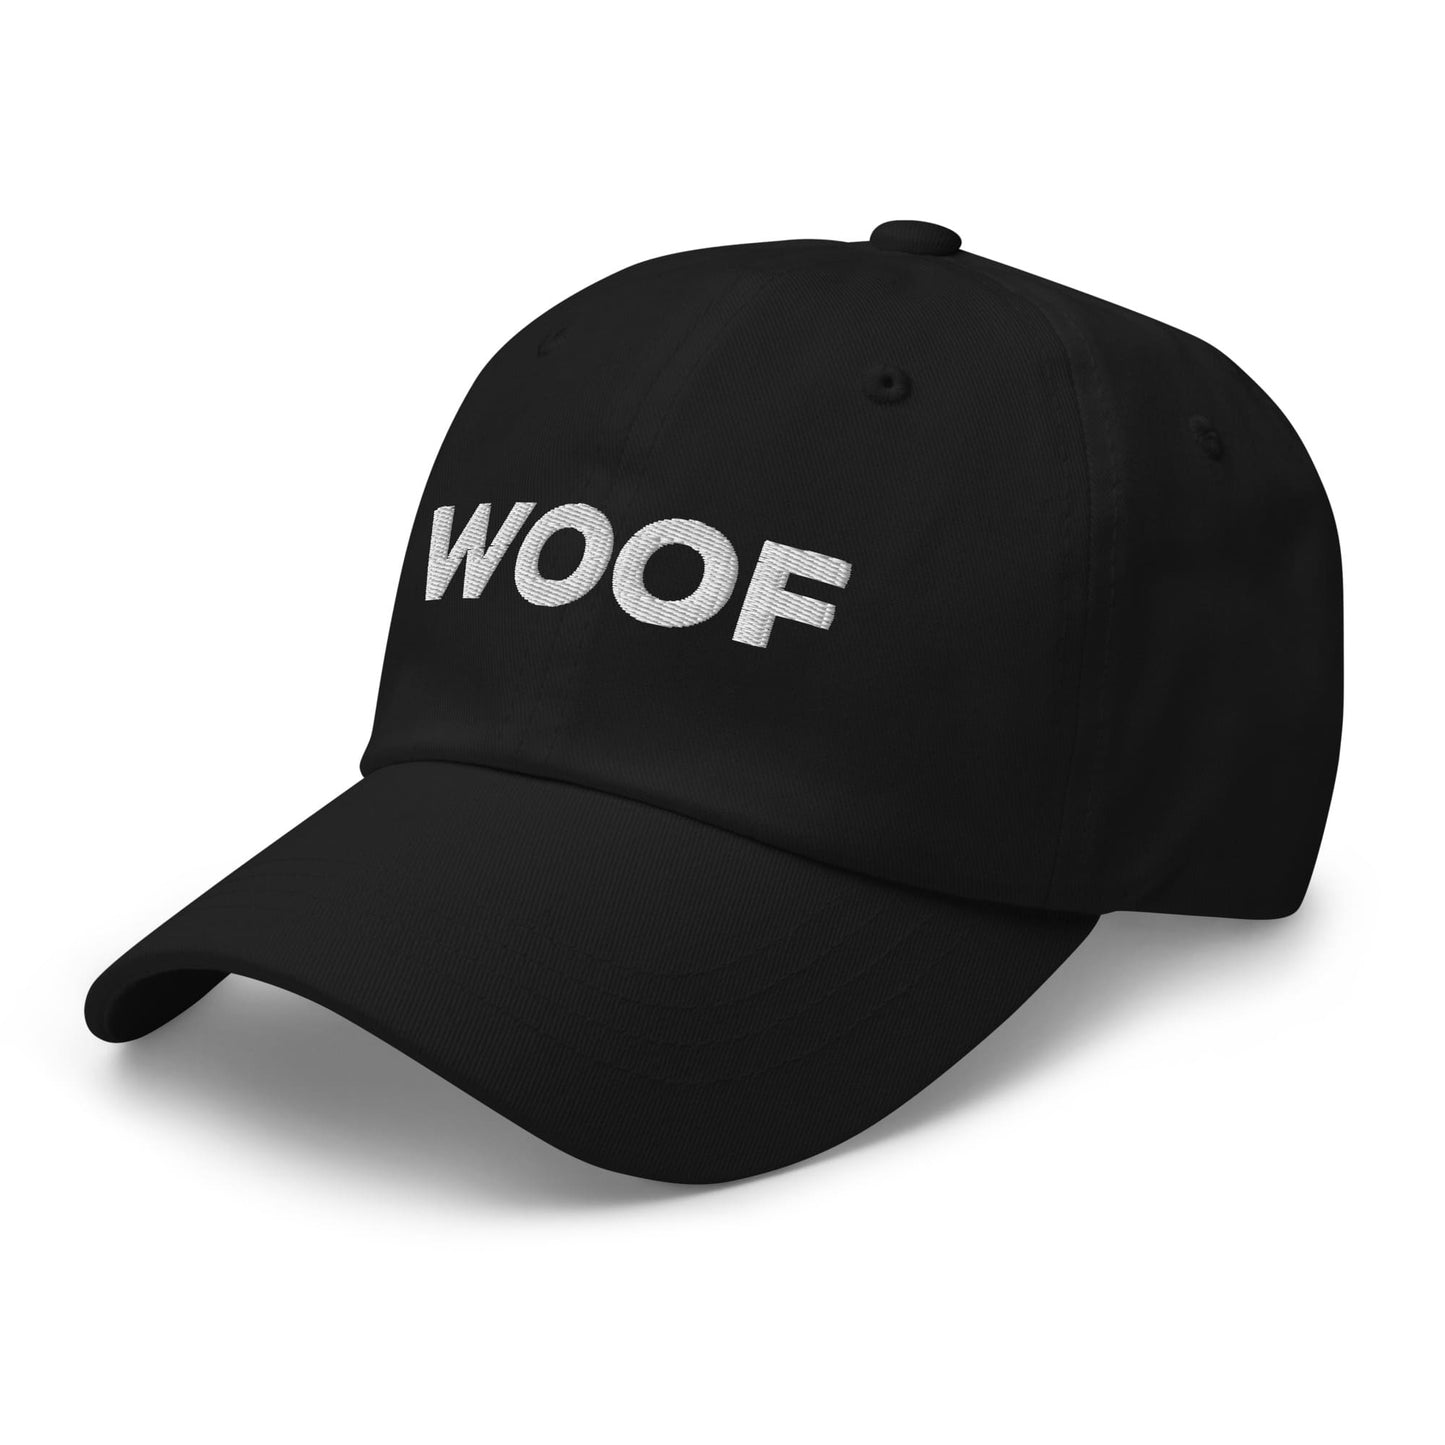 woof hat, embroidered bear pride or puppy play pride cap, right